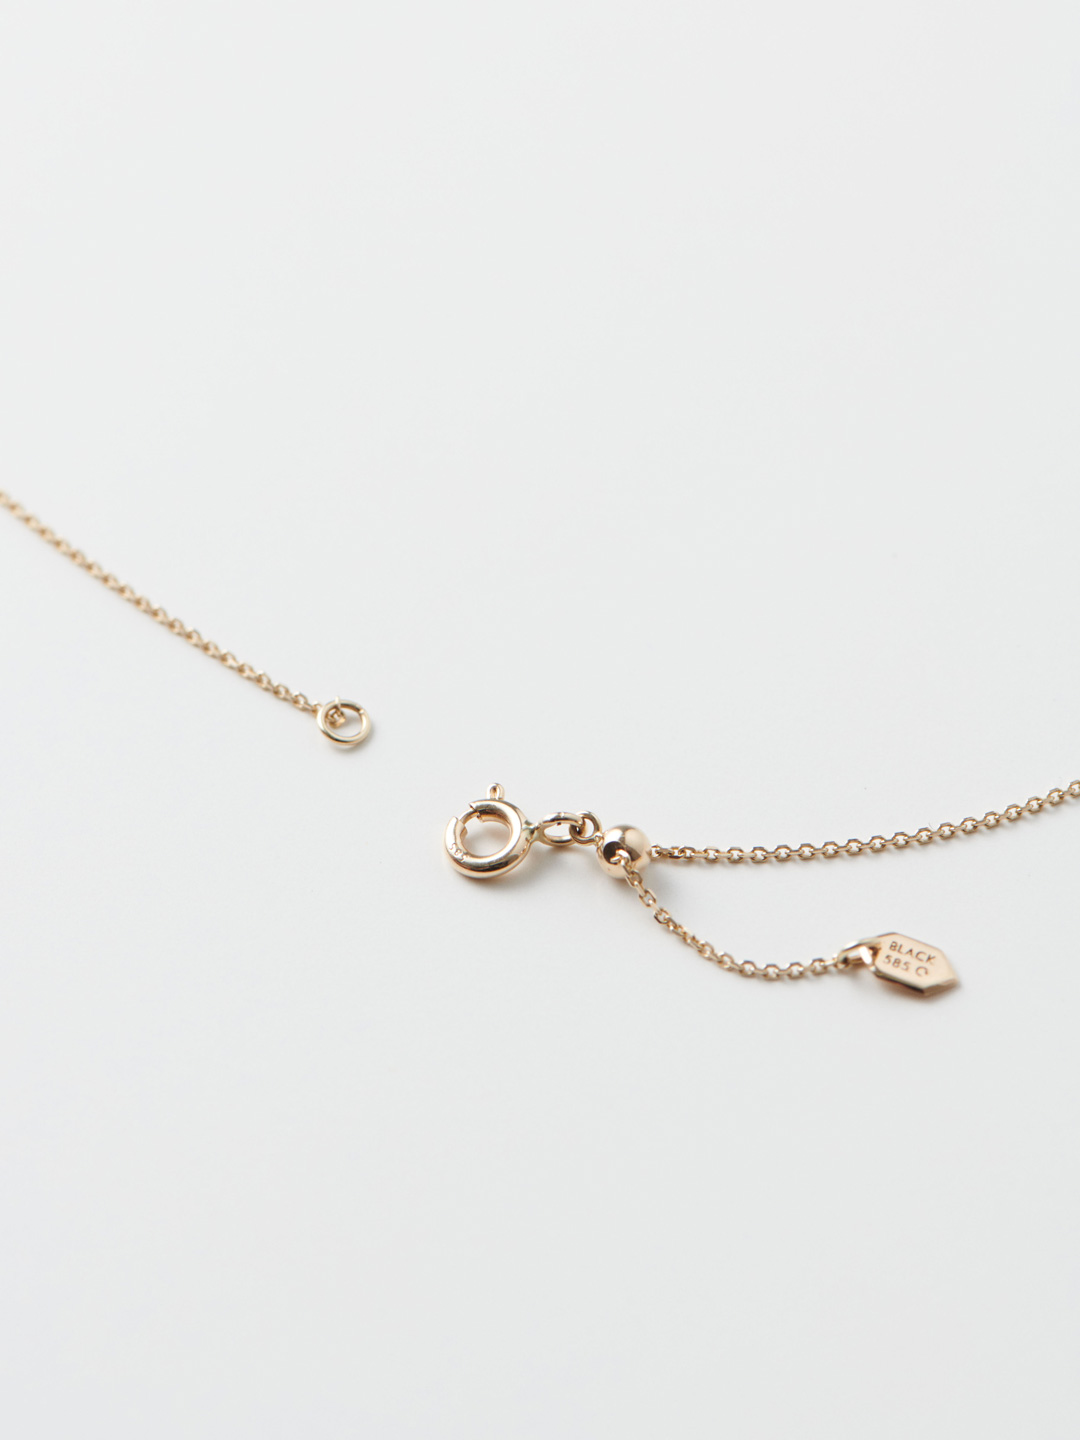 New Beginning Necklace - Yellow Gold